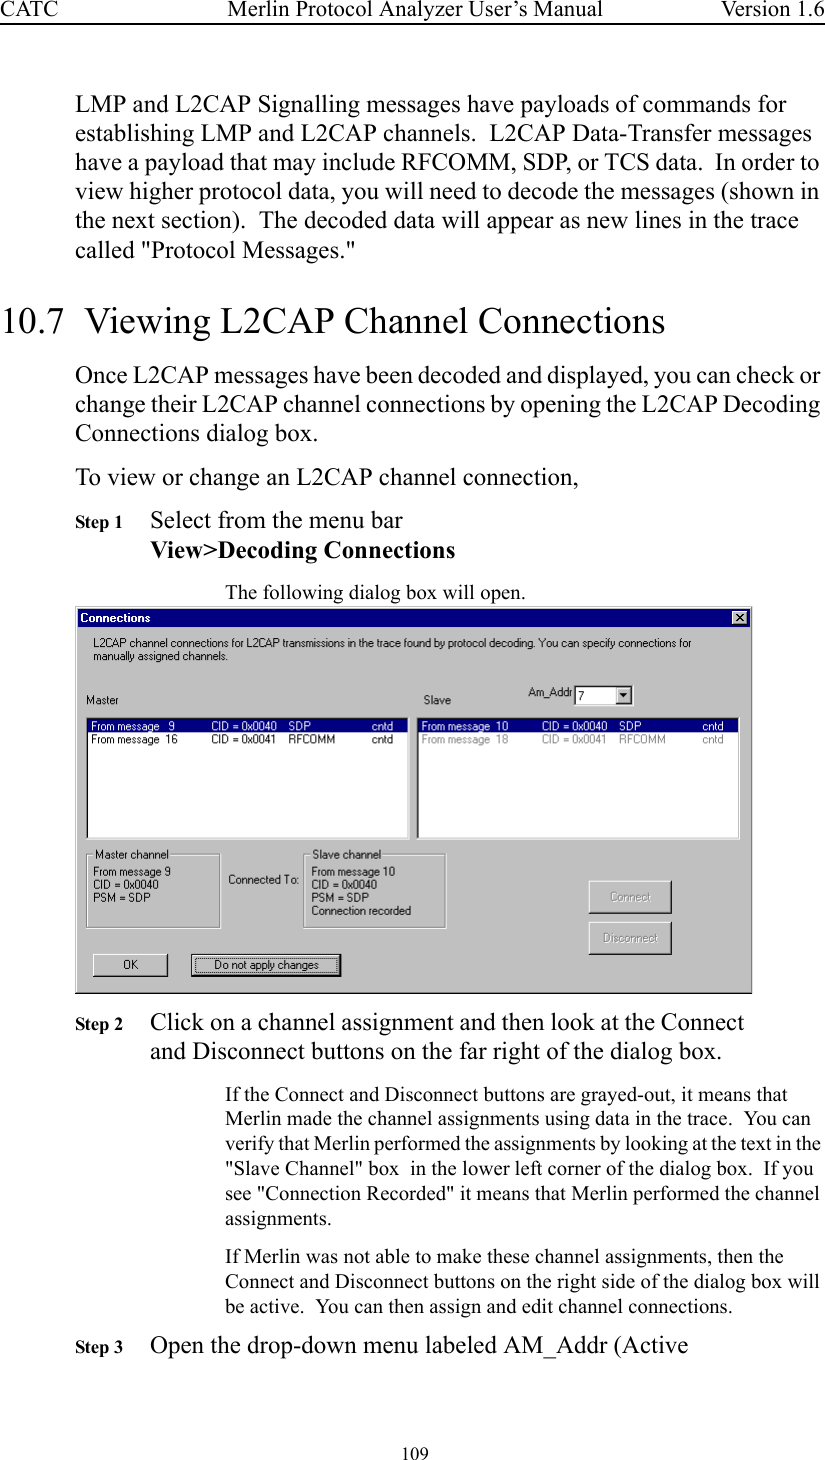  109 Merlin Protocol Analyzer User’s ManualCATC Version 1.6LMP and L2CAP Signalling messages have payloads of commands for establishing LMP and L2CAP channels.  L2CAP Data-Transfer messages have a payload that may include RFCOMM, SDP, or TCS data.  In order to view higher protocol data, you will need to decode the messages (shown in the next section).  The decoded data will appear as new lines in the trace called &quot;Protocol Messages.&quot;10.7  Viewing L2CAP Channel ConnectionsOnce L2CAP messages have been decoded and displayed, you can check or change their L2CAP channel connections by opening the L2CAP Decoding Connections dialog box.To view or change an L2CAP channel connection,Step 1 Select from the menu barView&gt;Decoding ConnectionsThe following dialog box will open.Step 2 Click on a channel assignment and then look at the Connect and Disconnect buttons on the far right of the dialog box.  If the Connect and Disconnect buttons are grayed-out, it means that Merlin made the channel assignments using data in the trace.  You can verify that Merlin performed the assignments by looking at the text in the &quot;Slave Channel&quot; box  in the lower left corner of the dialog box.  If you see &quot;Connection Recorded&quot; it means that Merlin performed the channel assignments.  If Merlin was not able to make these channel assignments, then the Connect and Disconnect buttons on the right side of the dialog box will be active.  You can then assign and edit channel connections.Step 3 Open the drop-down menu labeled AM_Addr (Active 